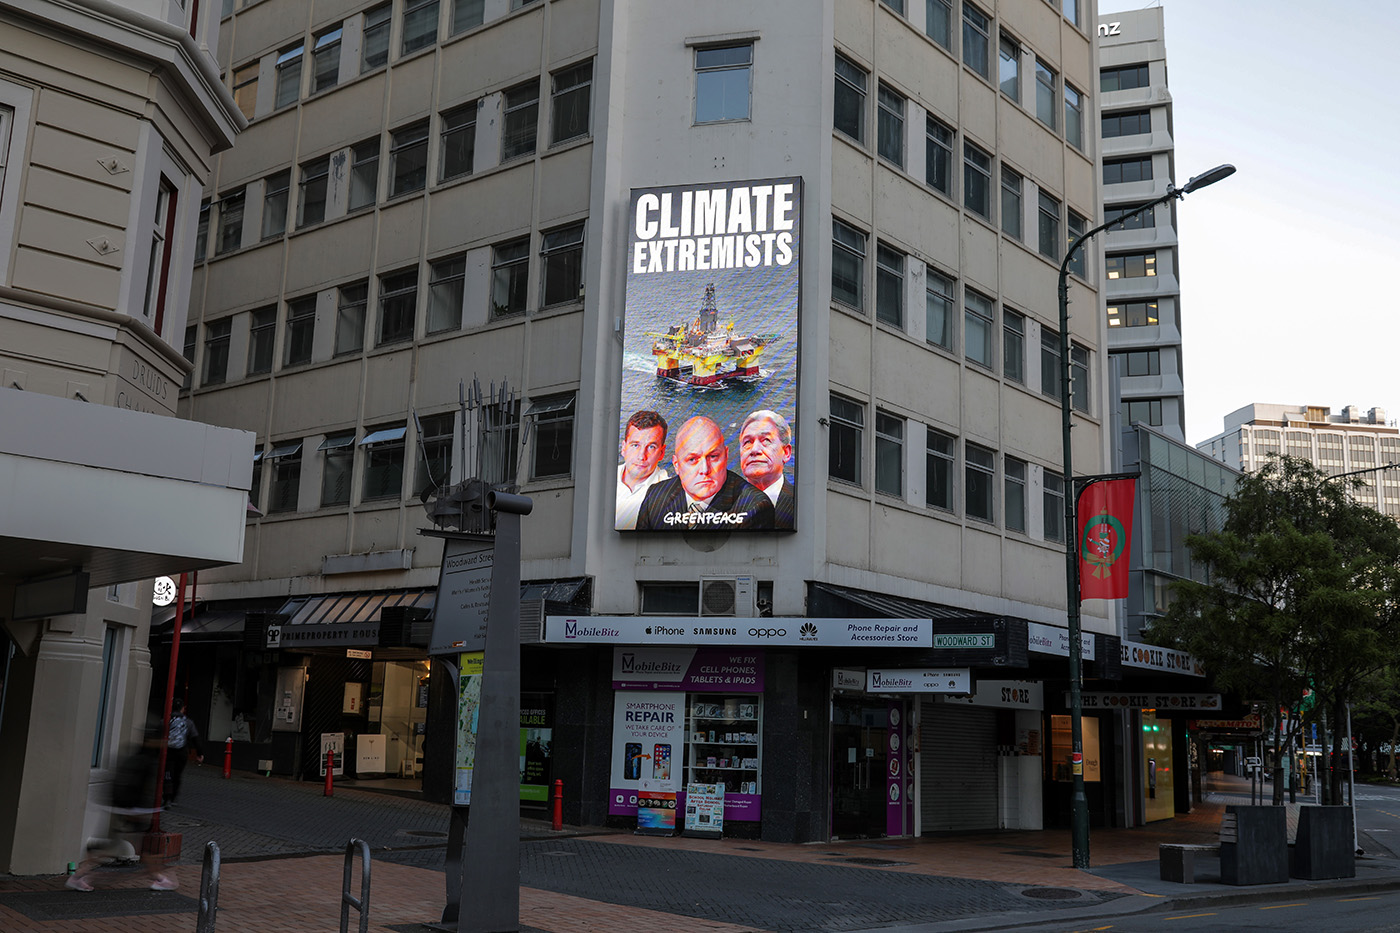 Christopher Luxon, David Seymour and Winston Peters are labelled as climate extremists on a billboard in Wellington with an offshore oil rig.